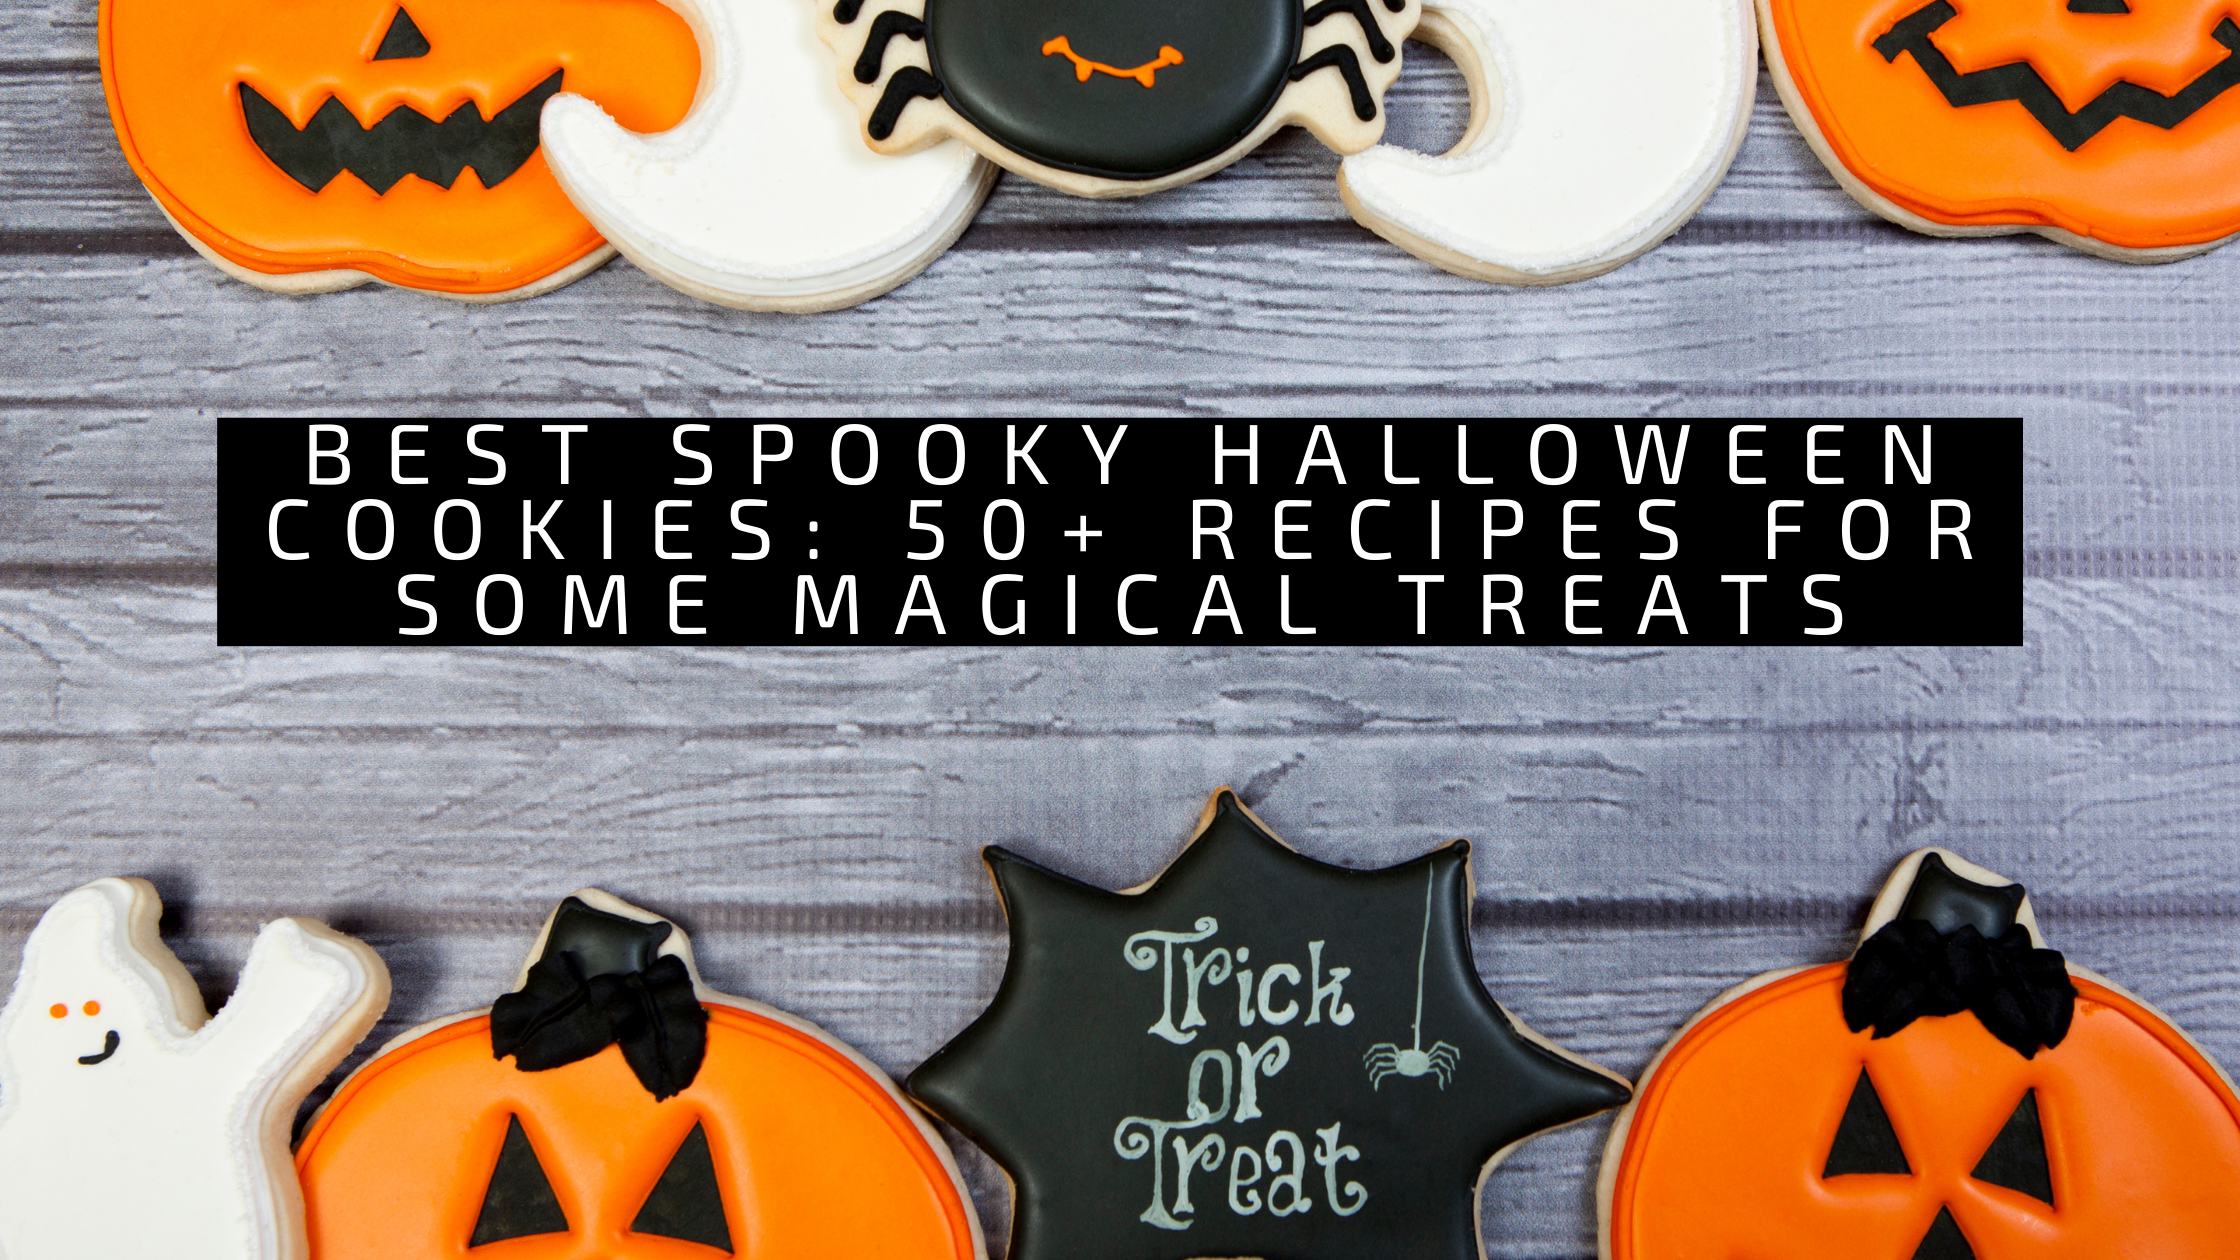 Best Spooky Halloween Cookies: 50+ Recipes for Some Magical Treats 47